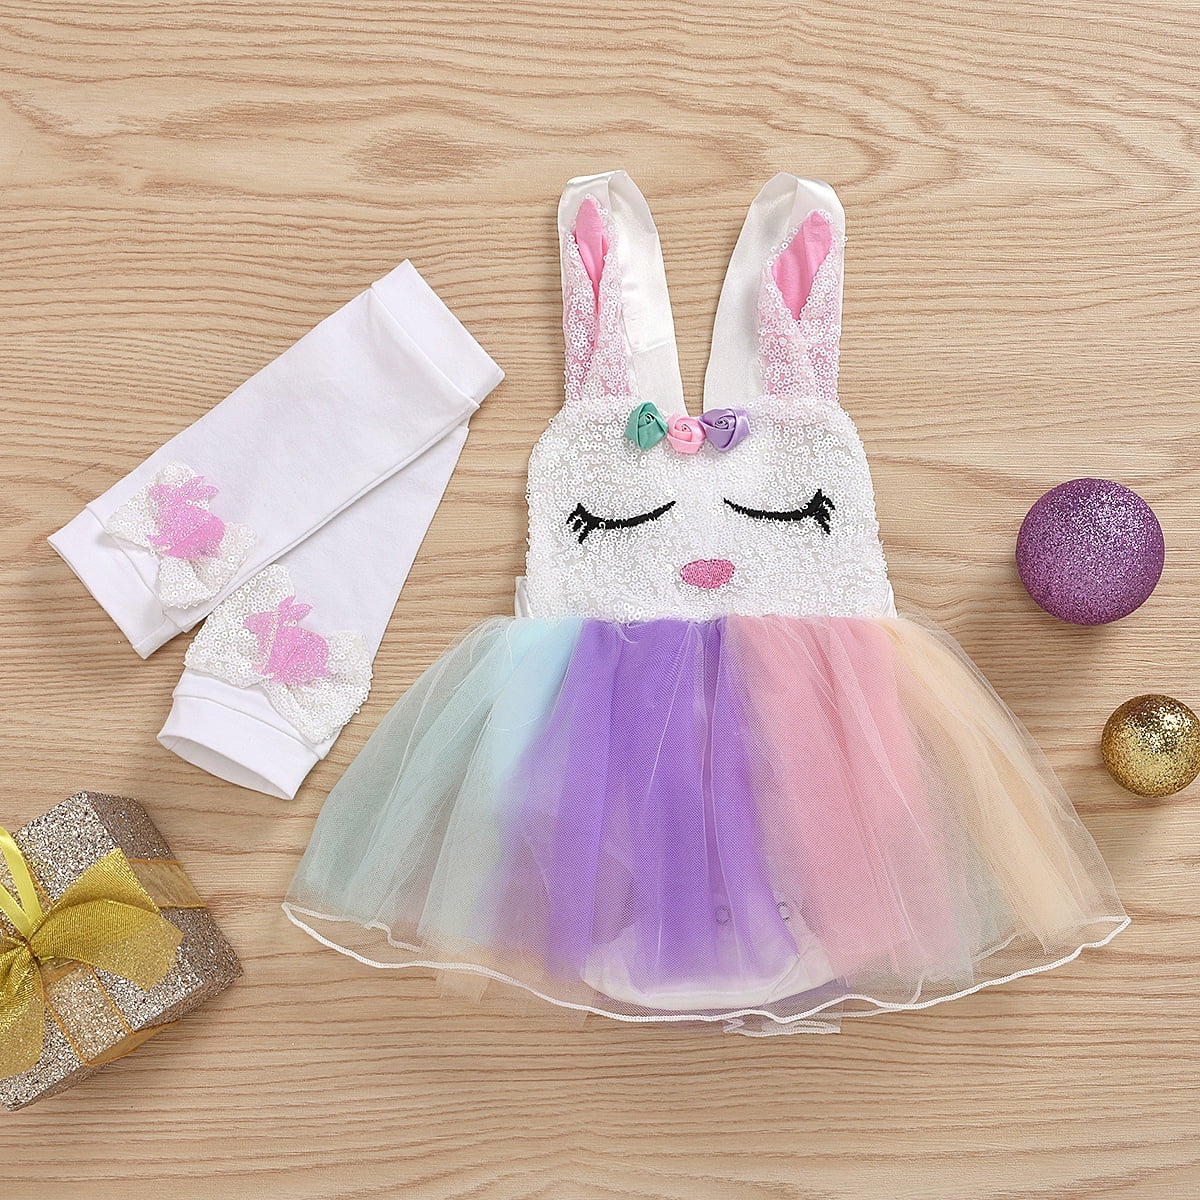 Cute Kawaii Pink Floral Dress Bunny Plushie Dolls Stuffed Cartoon Animals  Baby Cuddly Rabbit Appease Toy for Kids Birthday Gift - AliExpress